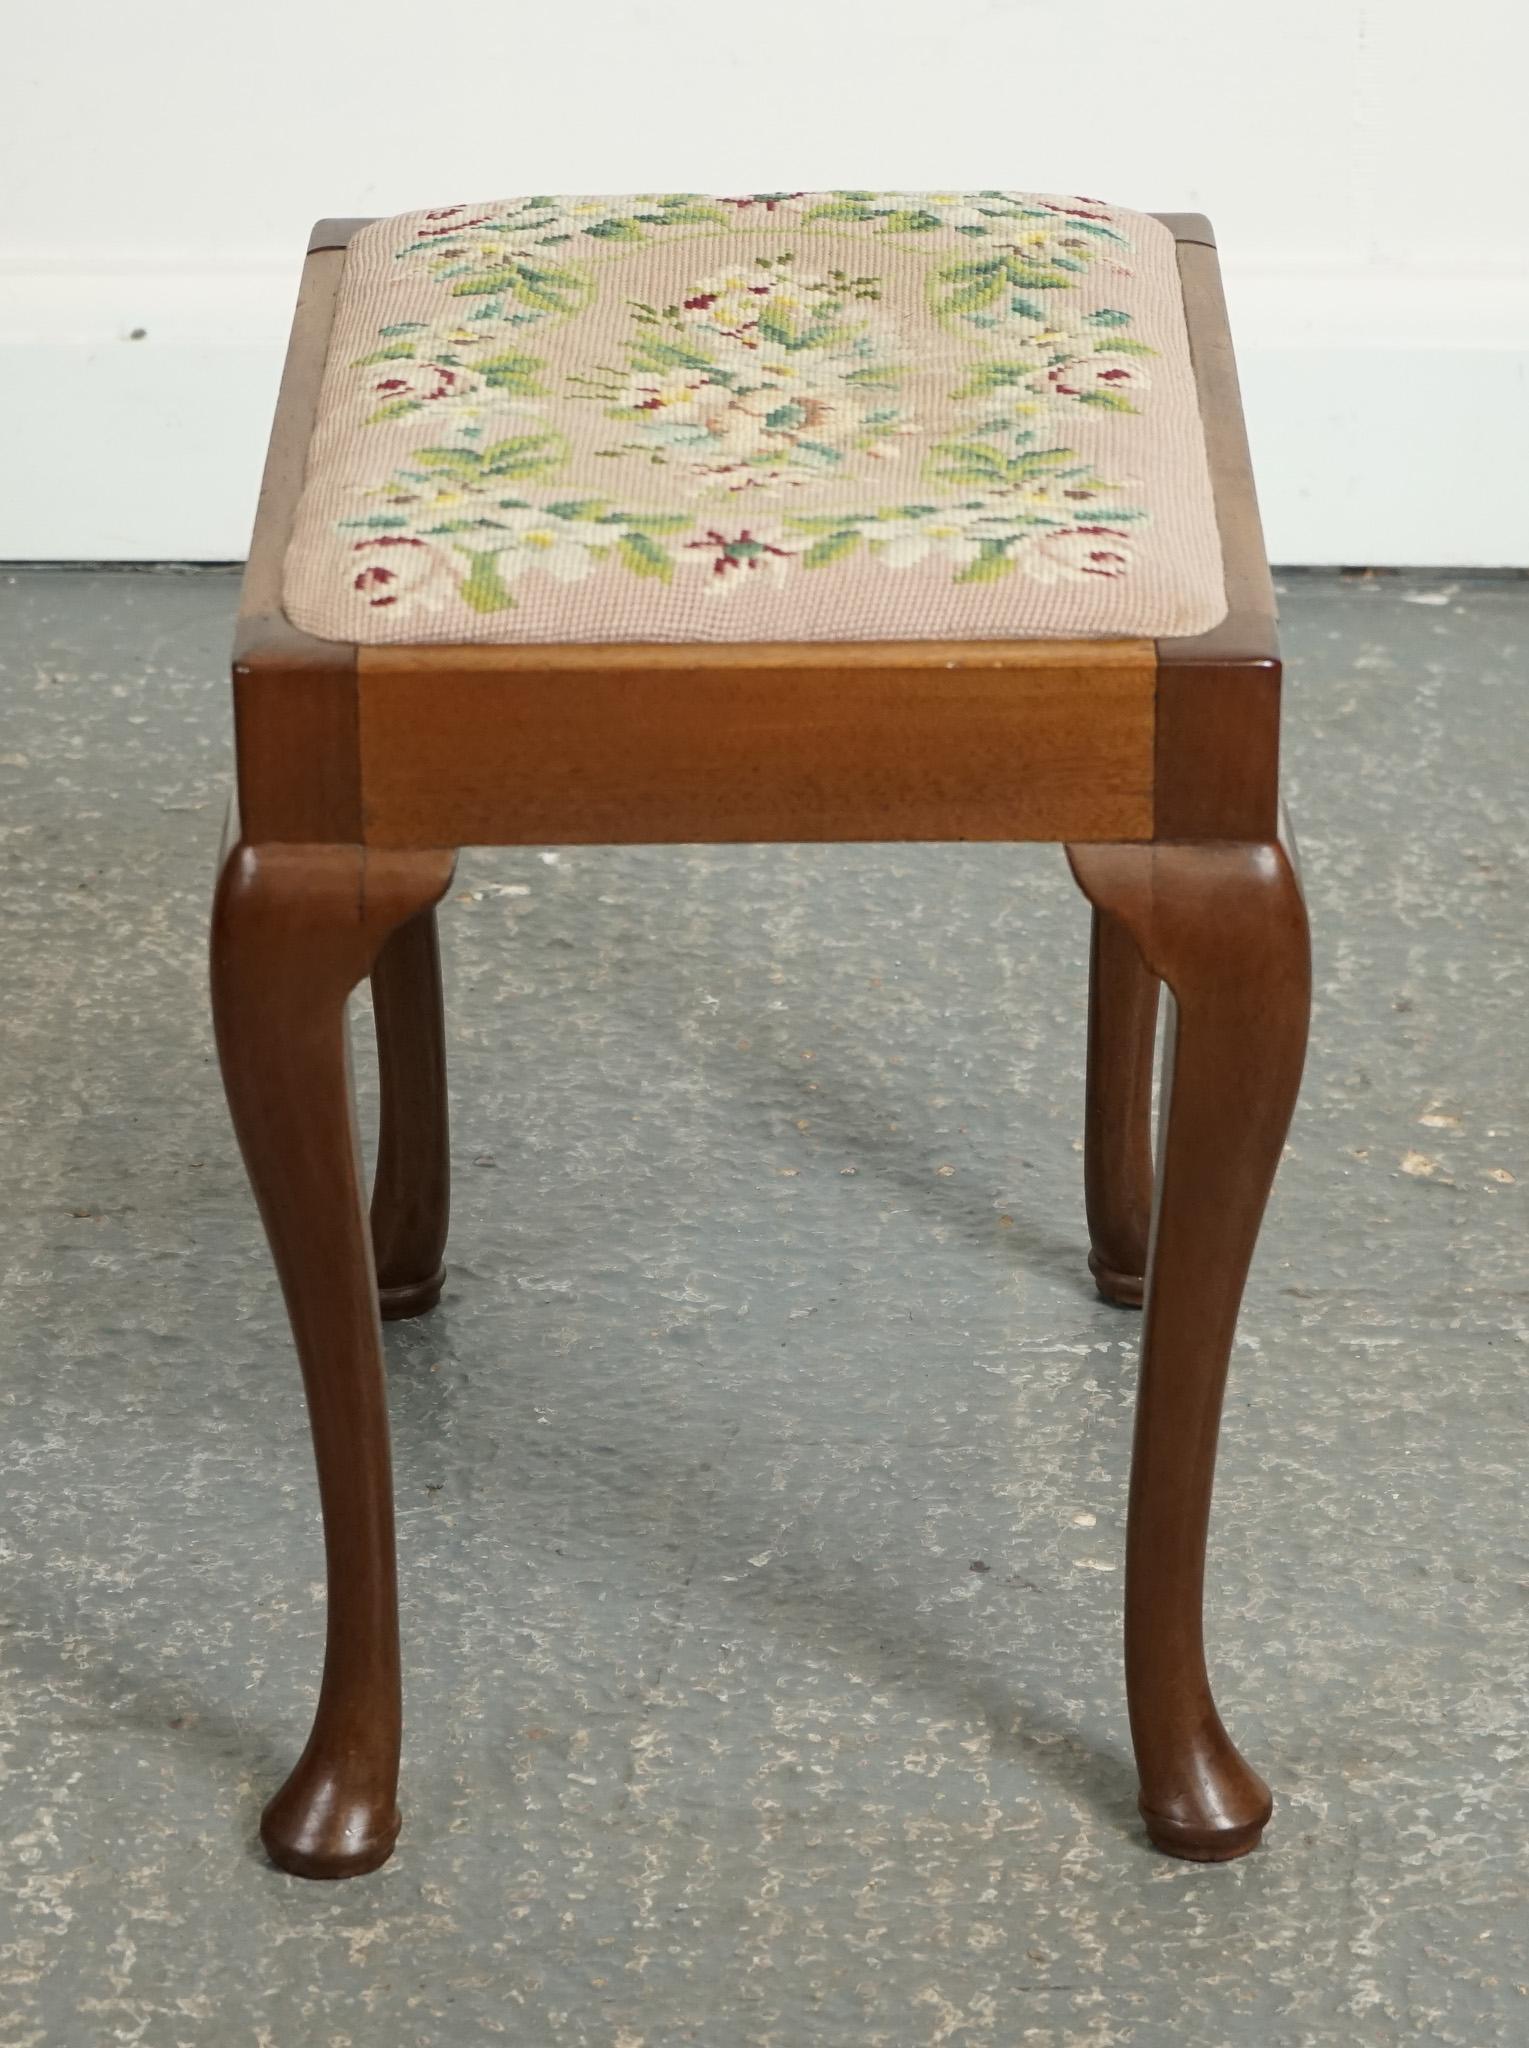 British LOVELY PIANO DRESSING TABLE STOOL WITH FLOWER STITCHWORK WITH QUEEN ANNE LEGS j1 For Sale